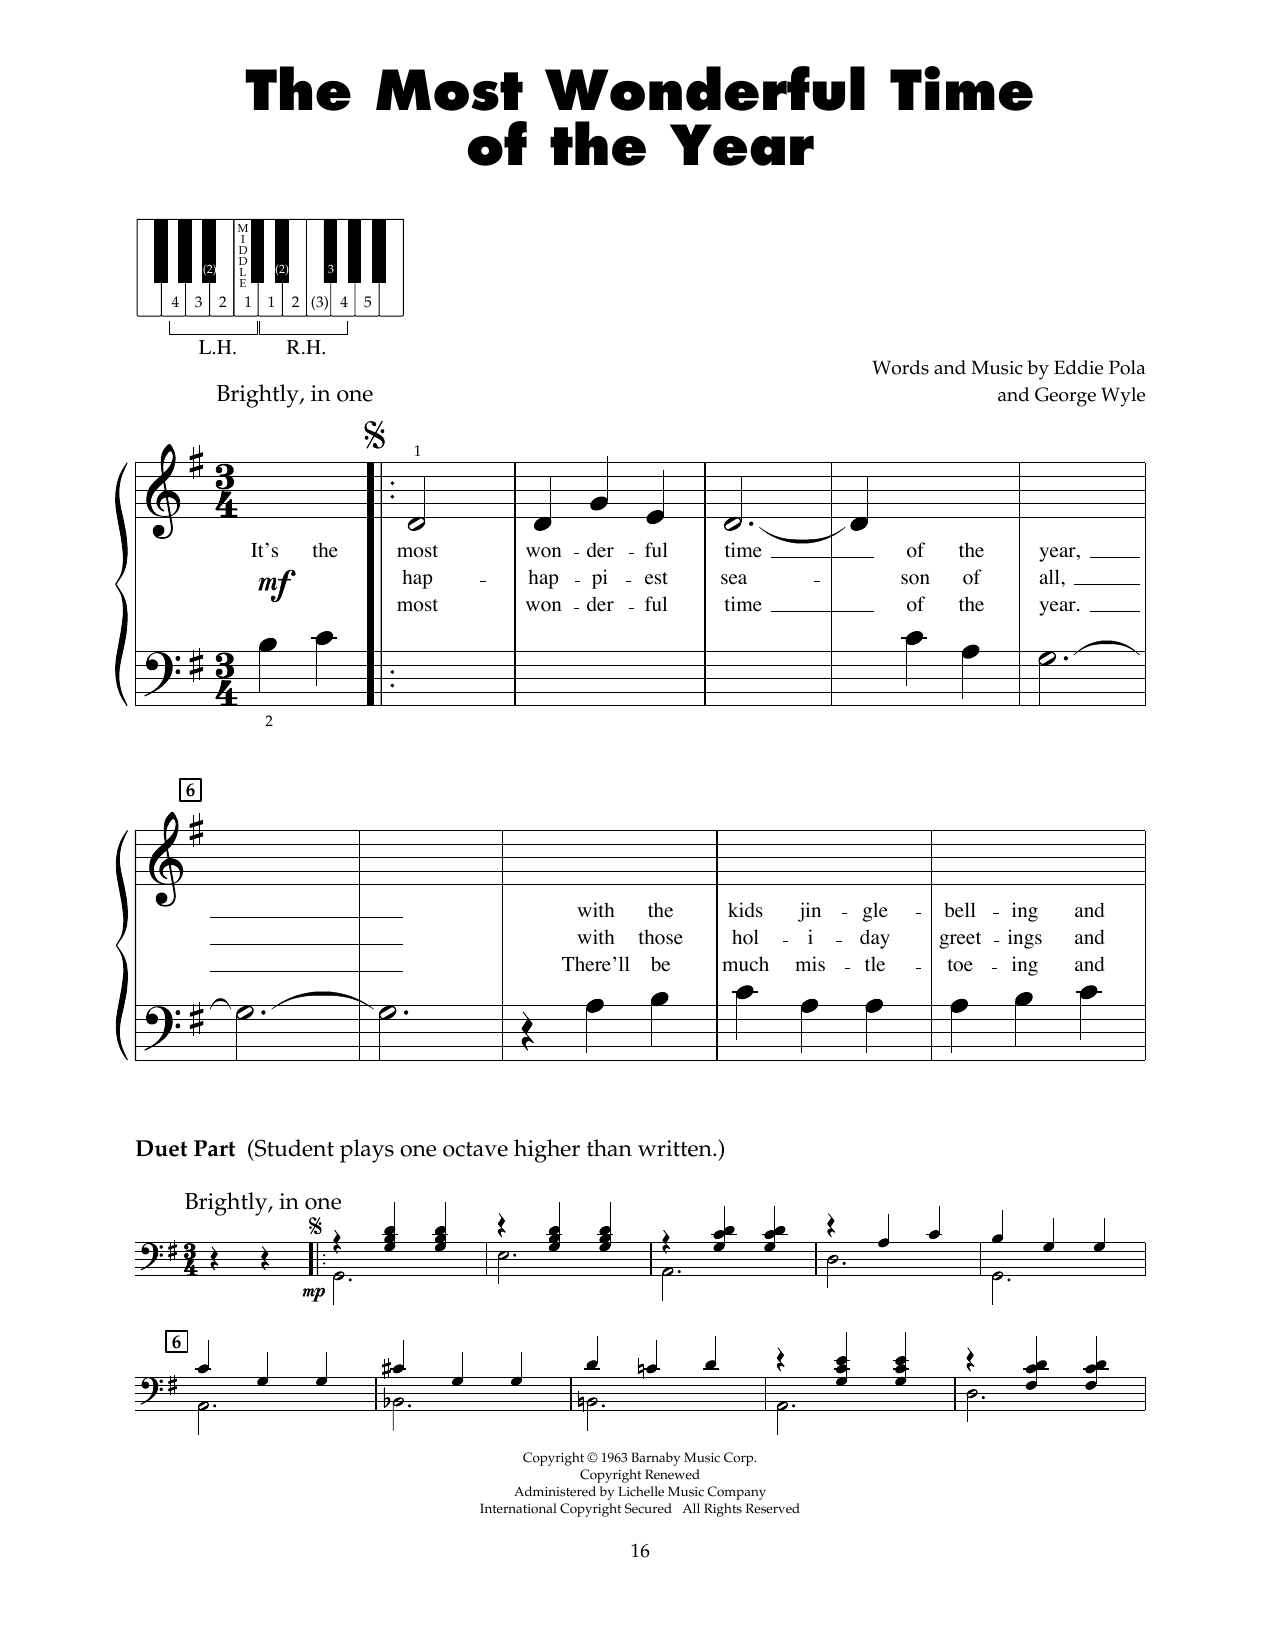 Andy Wiliams The Most Wonderful Time Of The Year sheet music notes printable PDF score